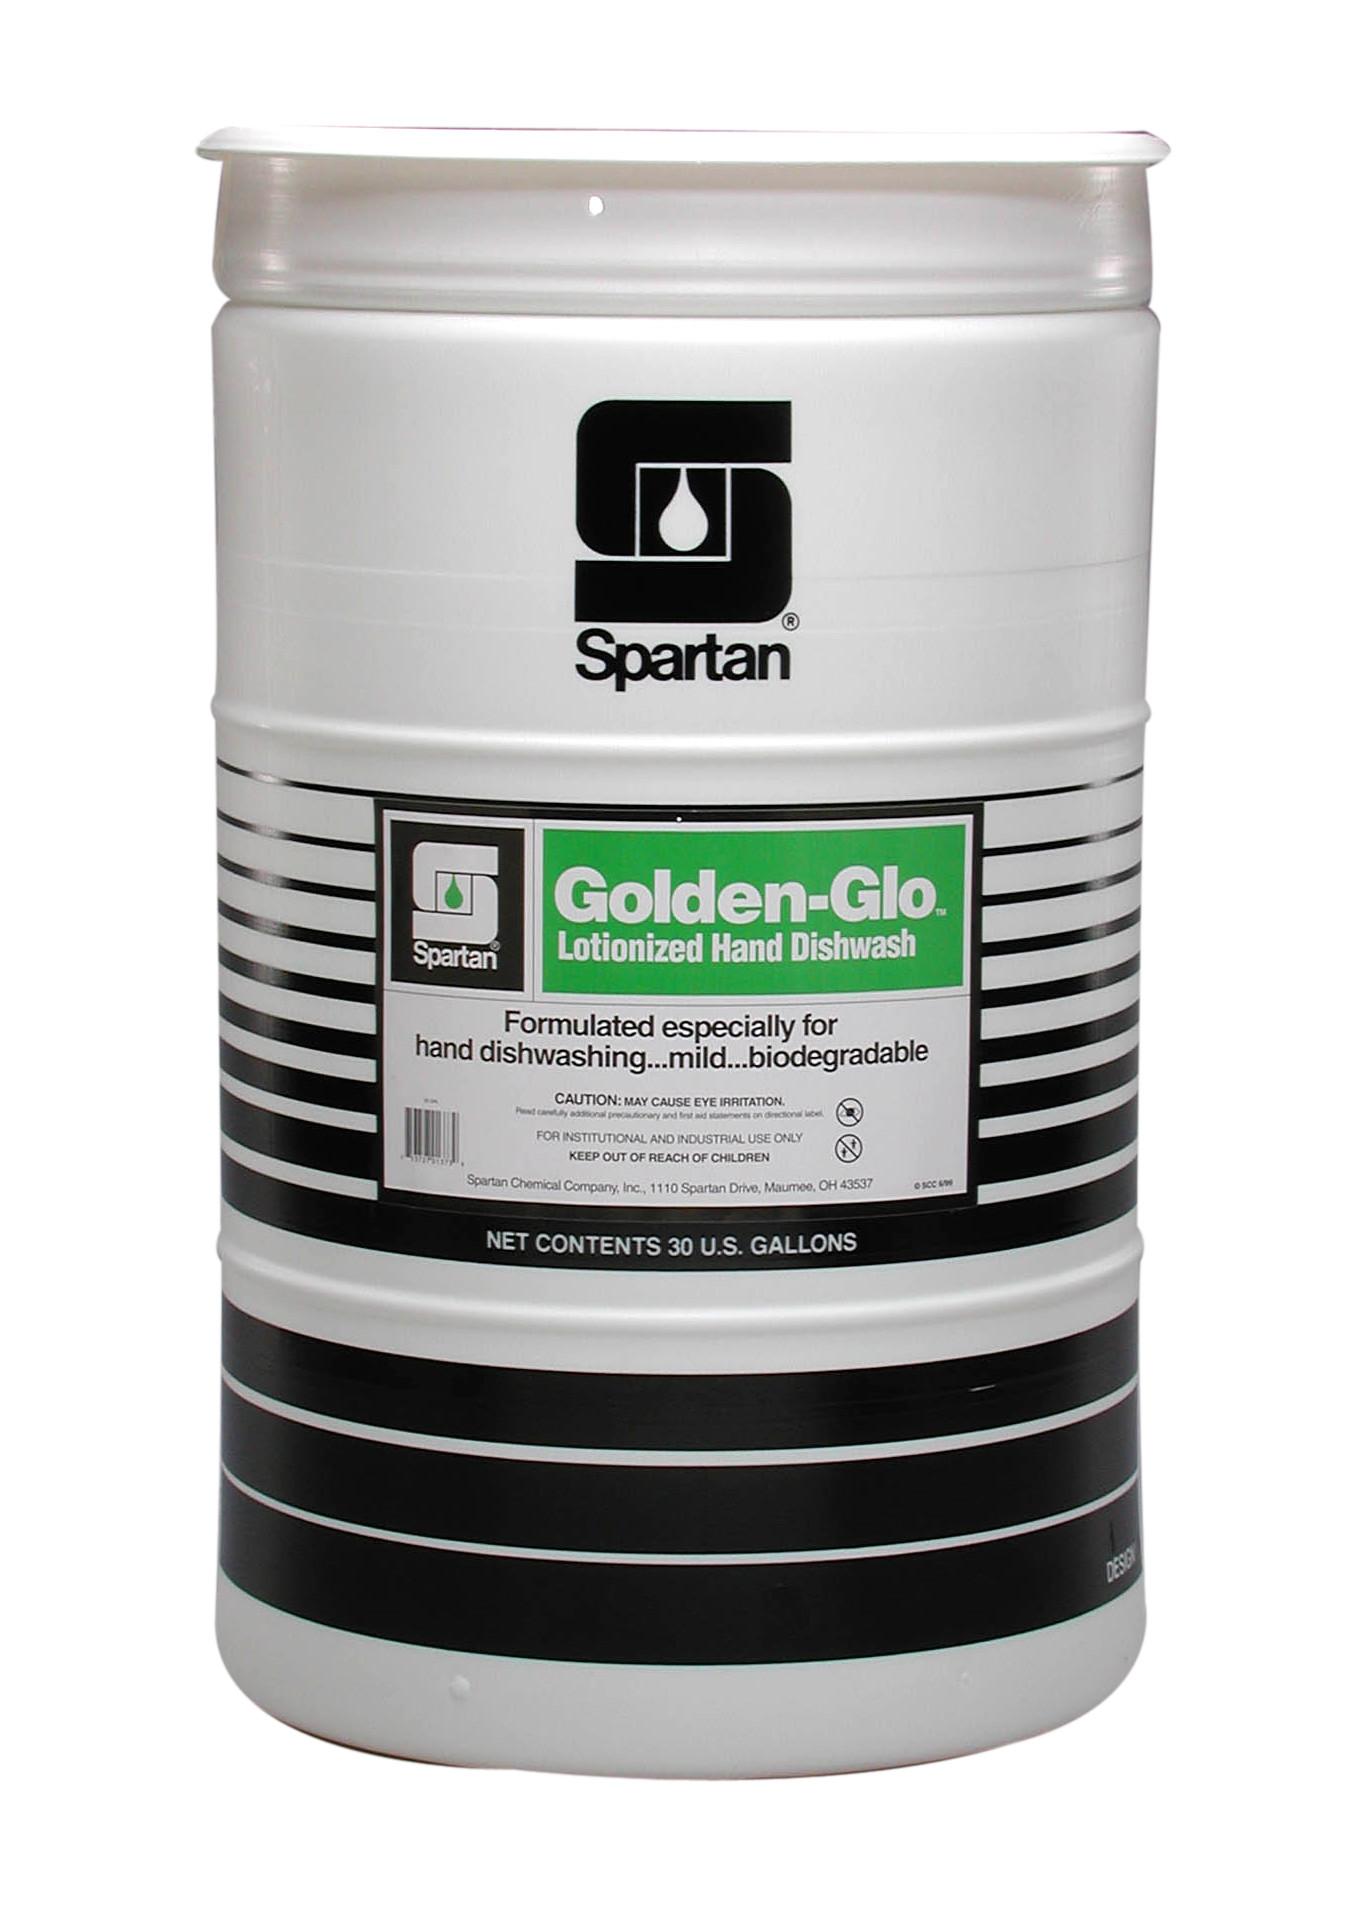 Spartan Chemical Company Golden-Glo, 30 GAL DRUM